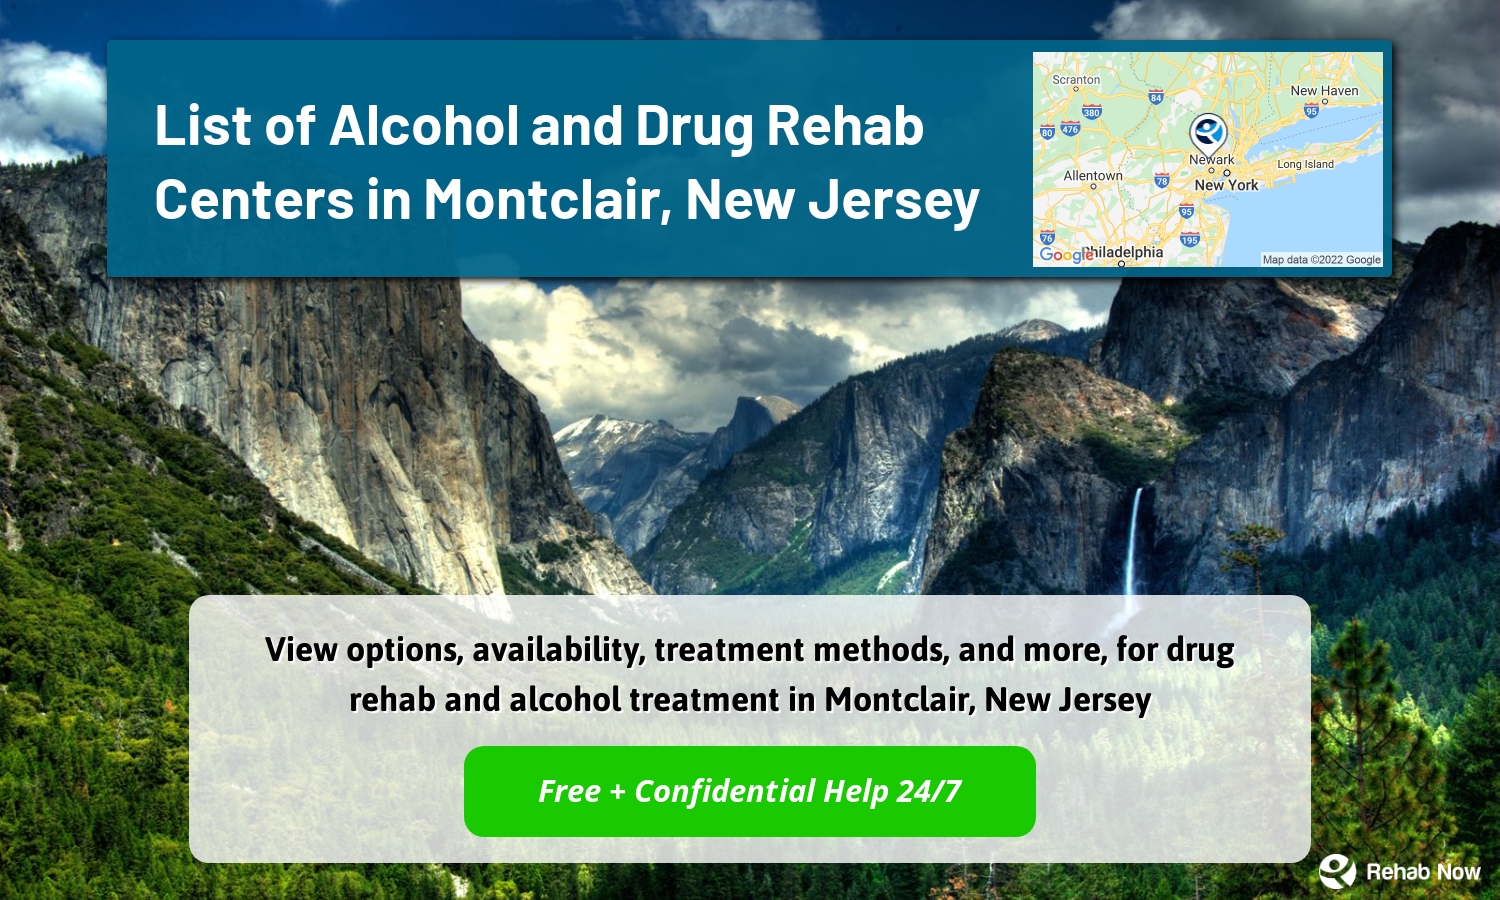 View options, availability, treatment methods, and more, for drug rehab and alcohol treatment in Montclair, New Jersey